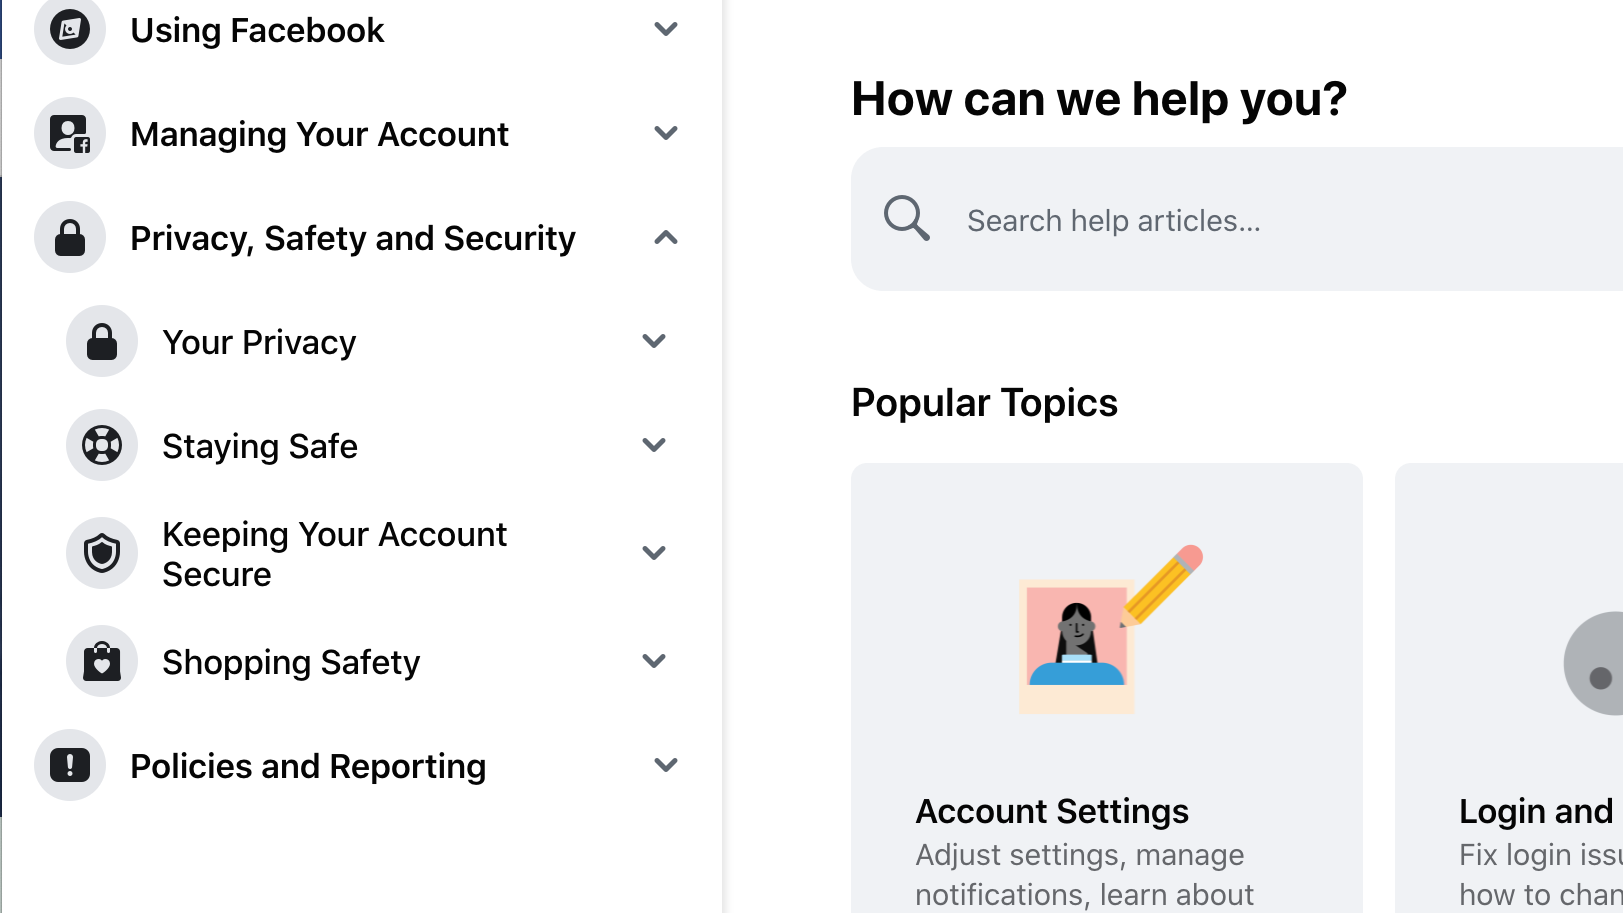 Facebook's privacy and safety Help Center tab